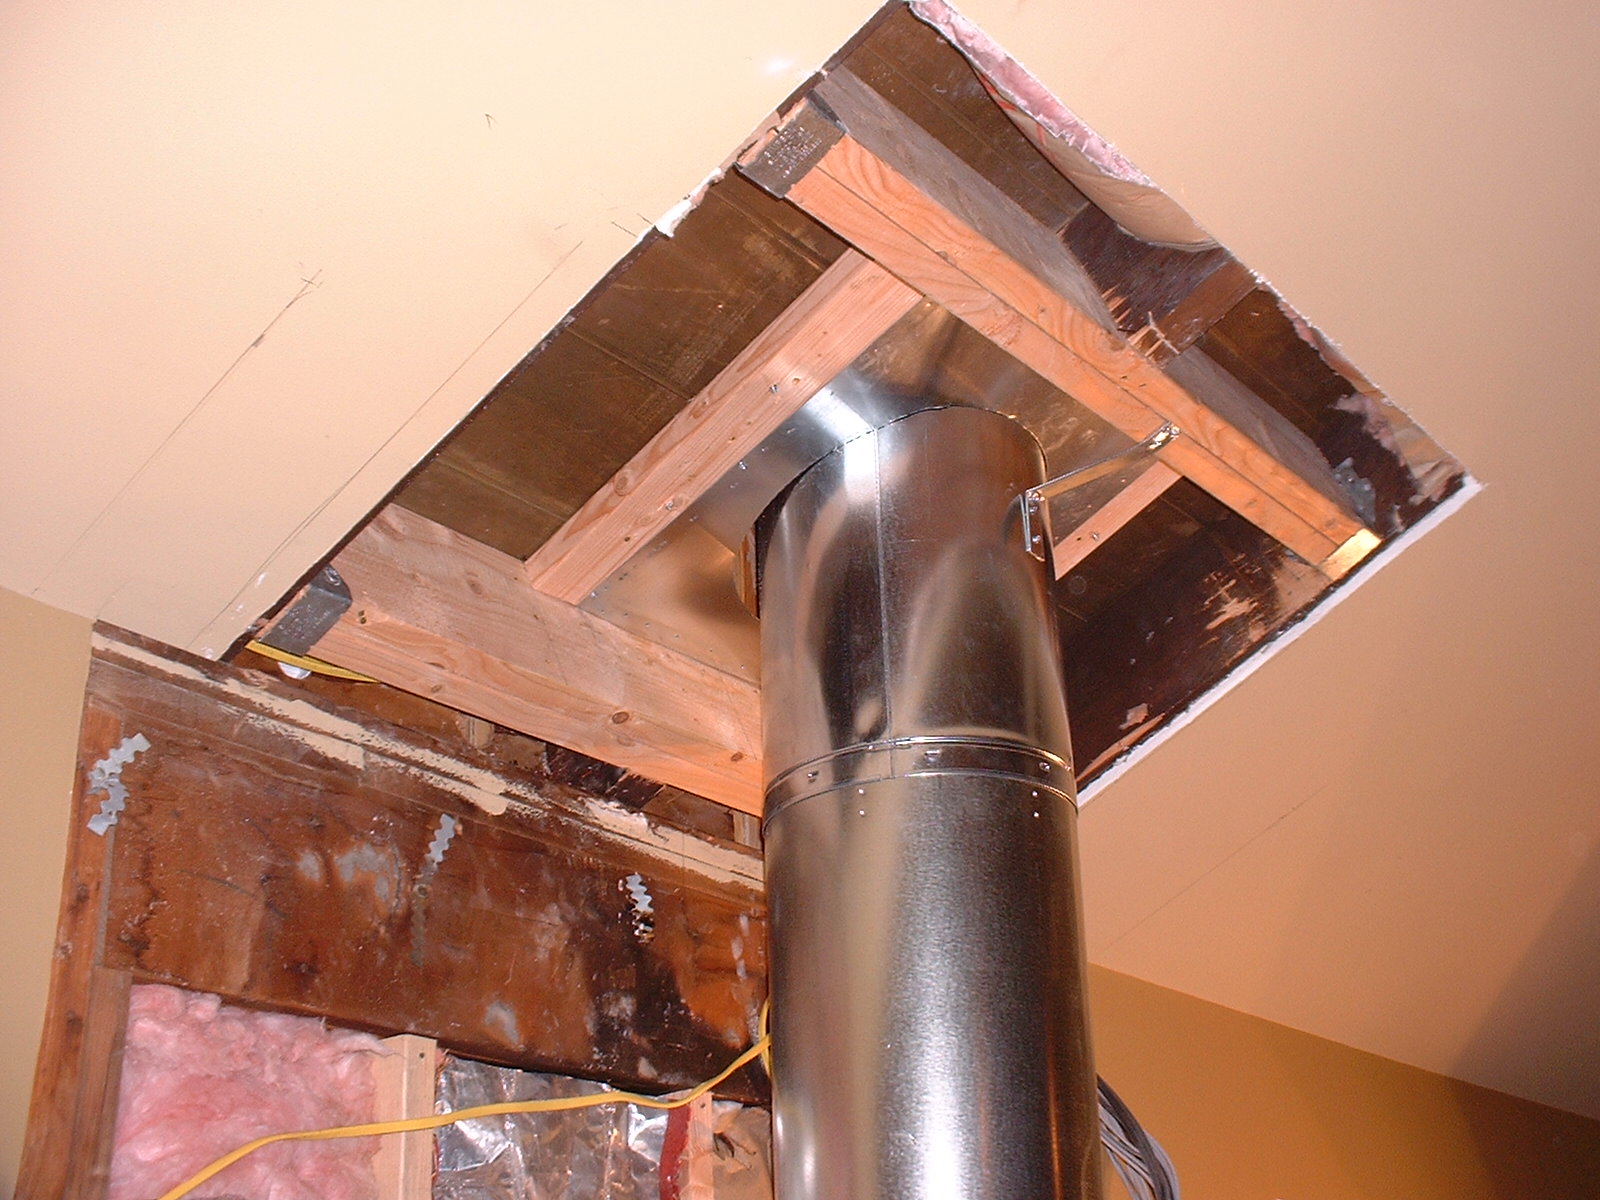 The chimney stack had to go through the cieling and onto the roof.